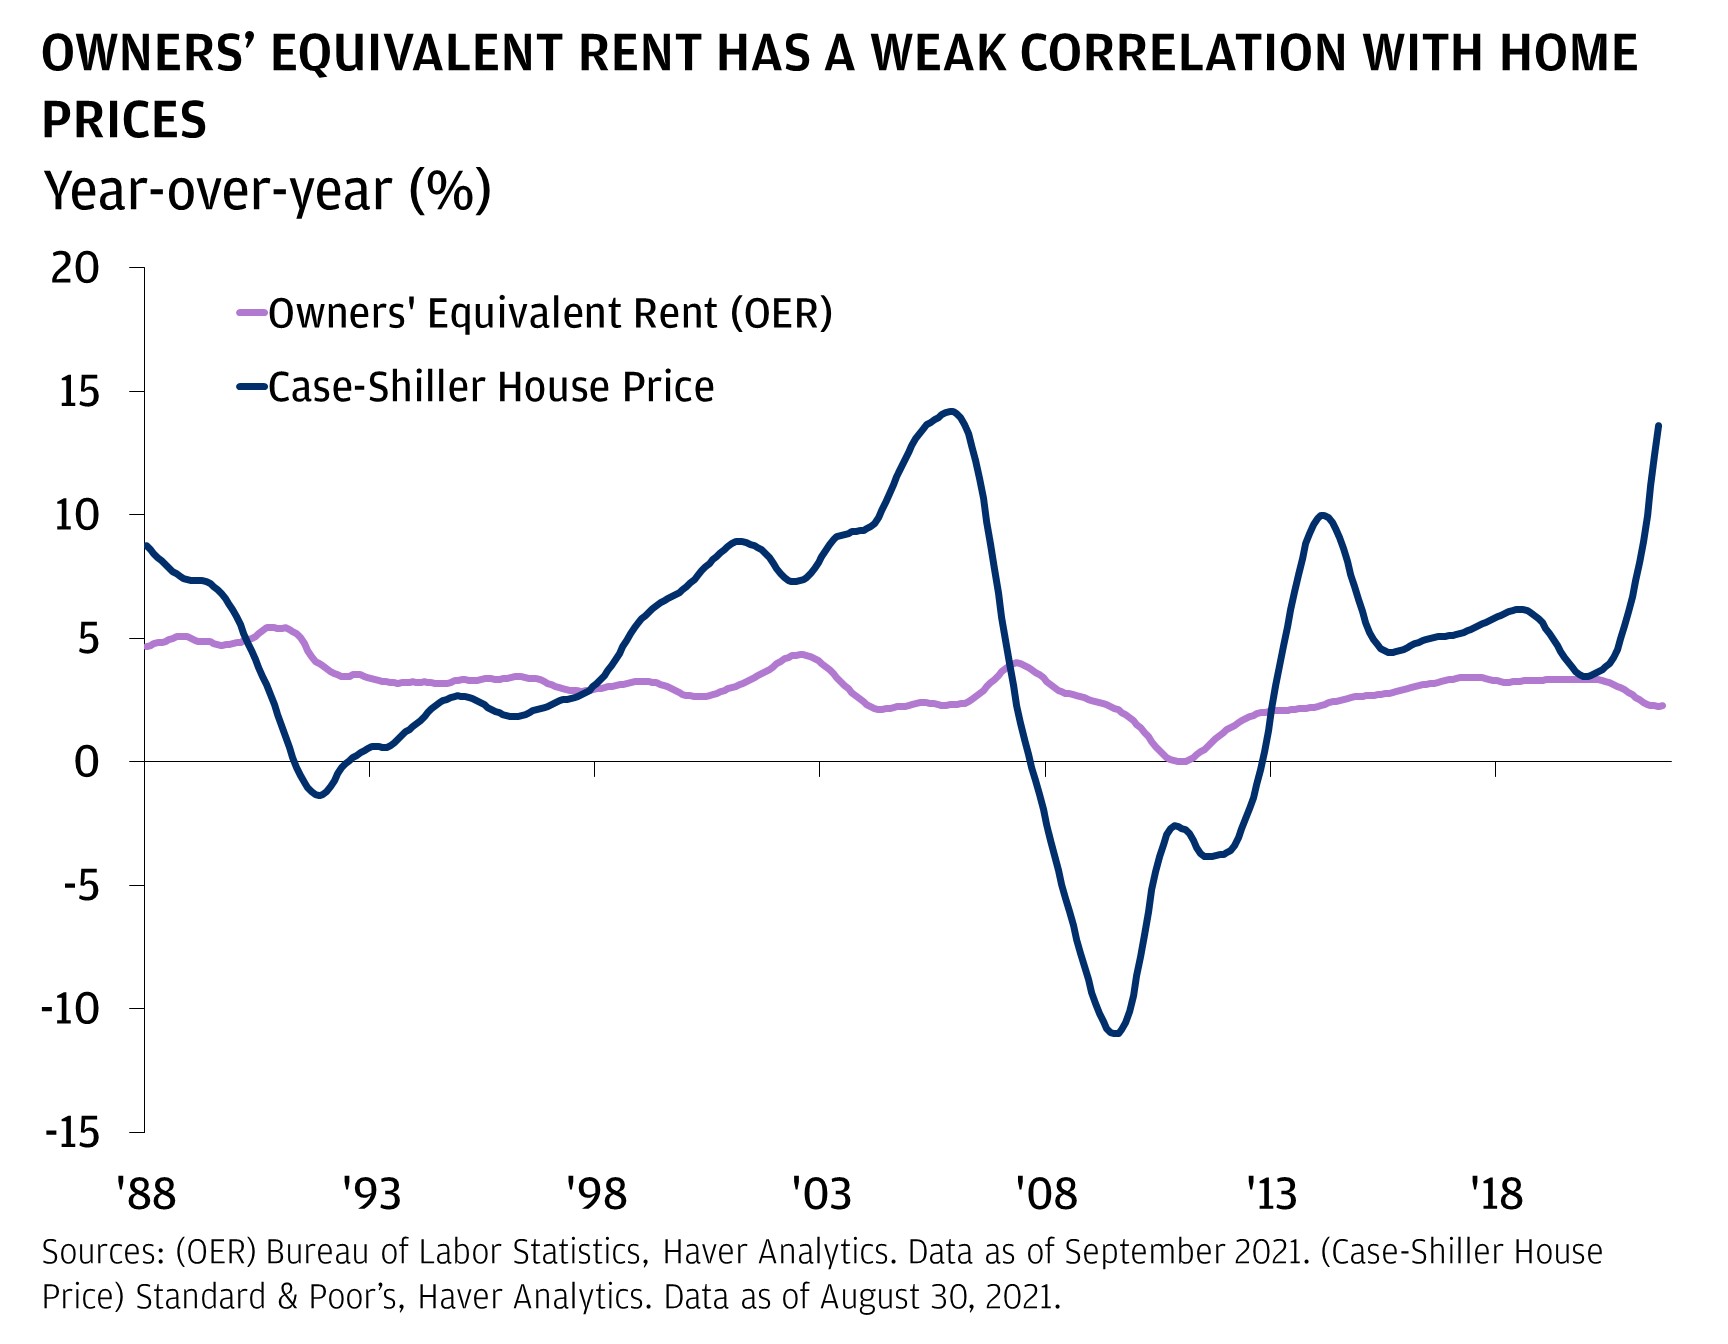 OWNER' EQUIVALENT RENT HAS A WEAK CORRELATION WITH HOME